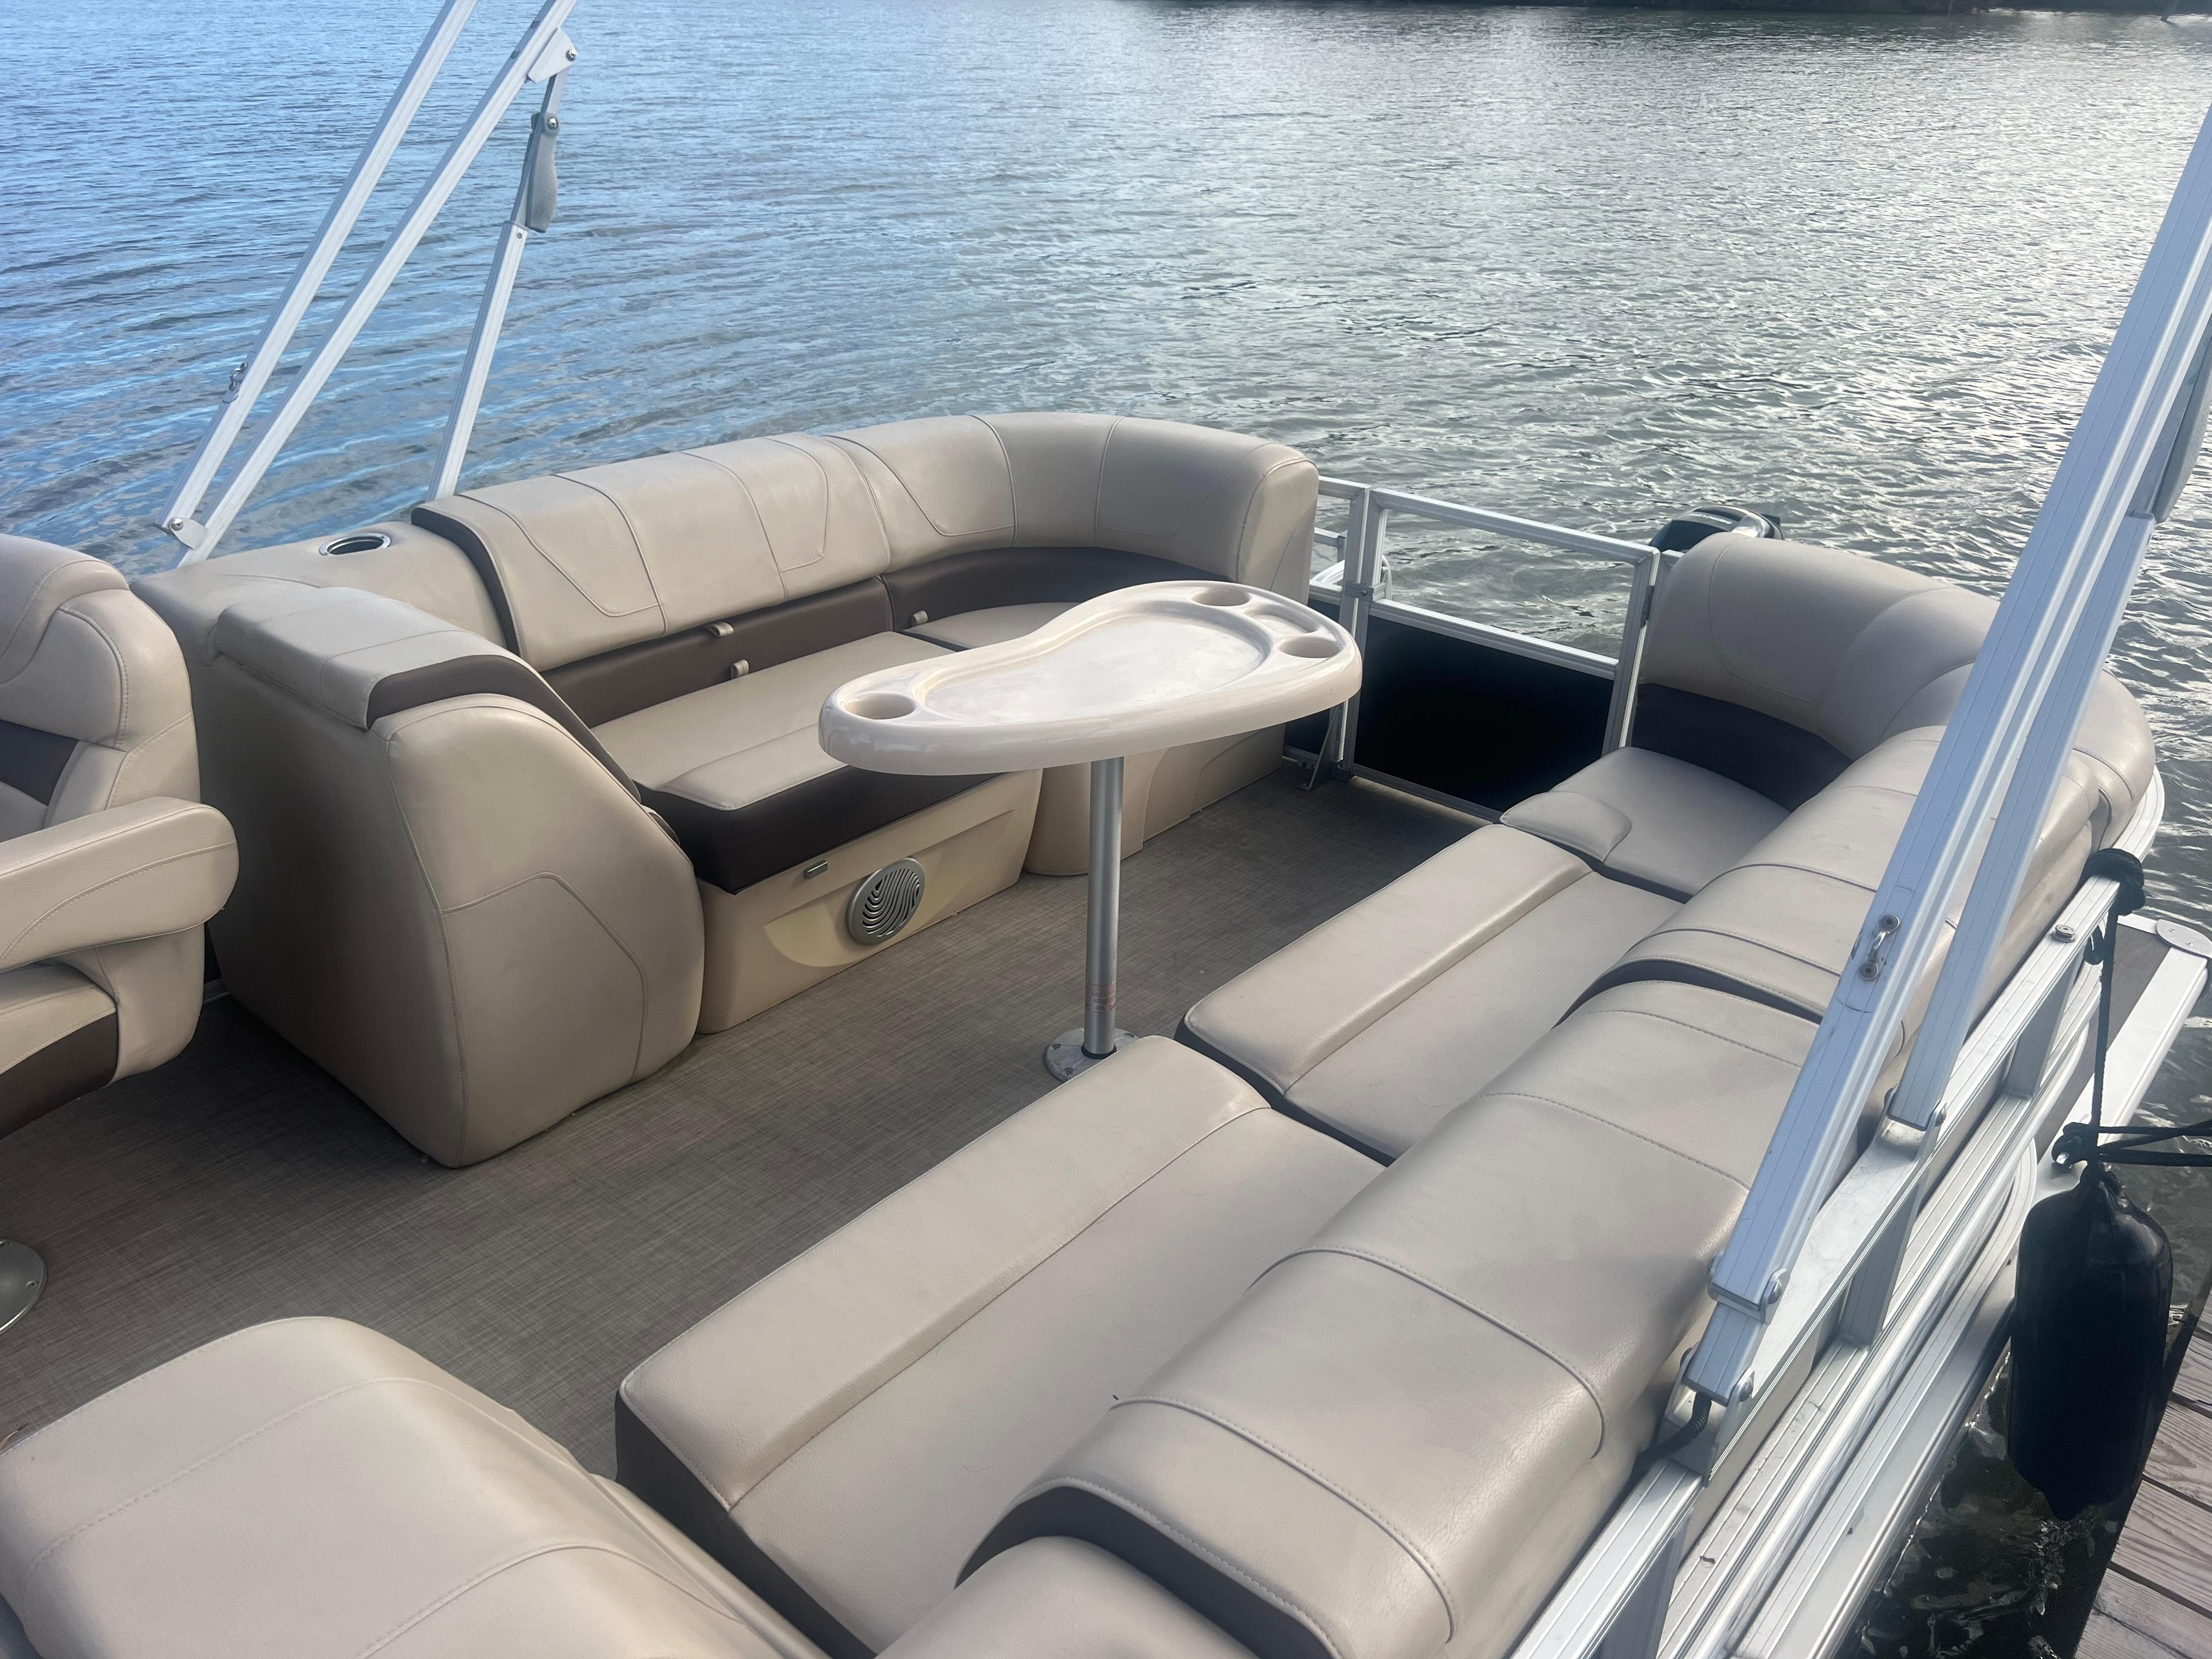 2018 Sun Tracker Party Barge 22 DLX